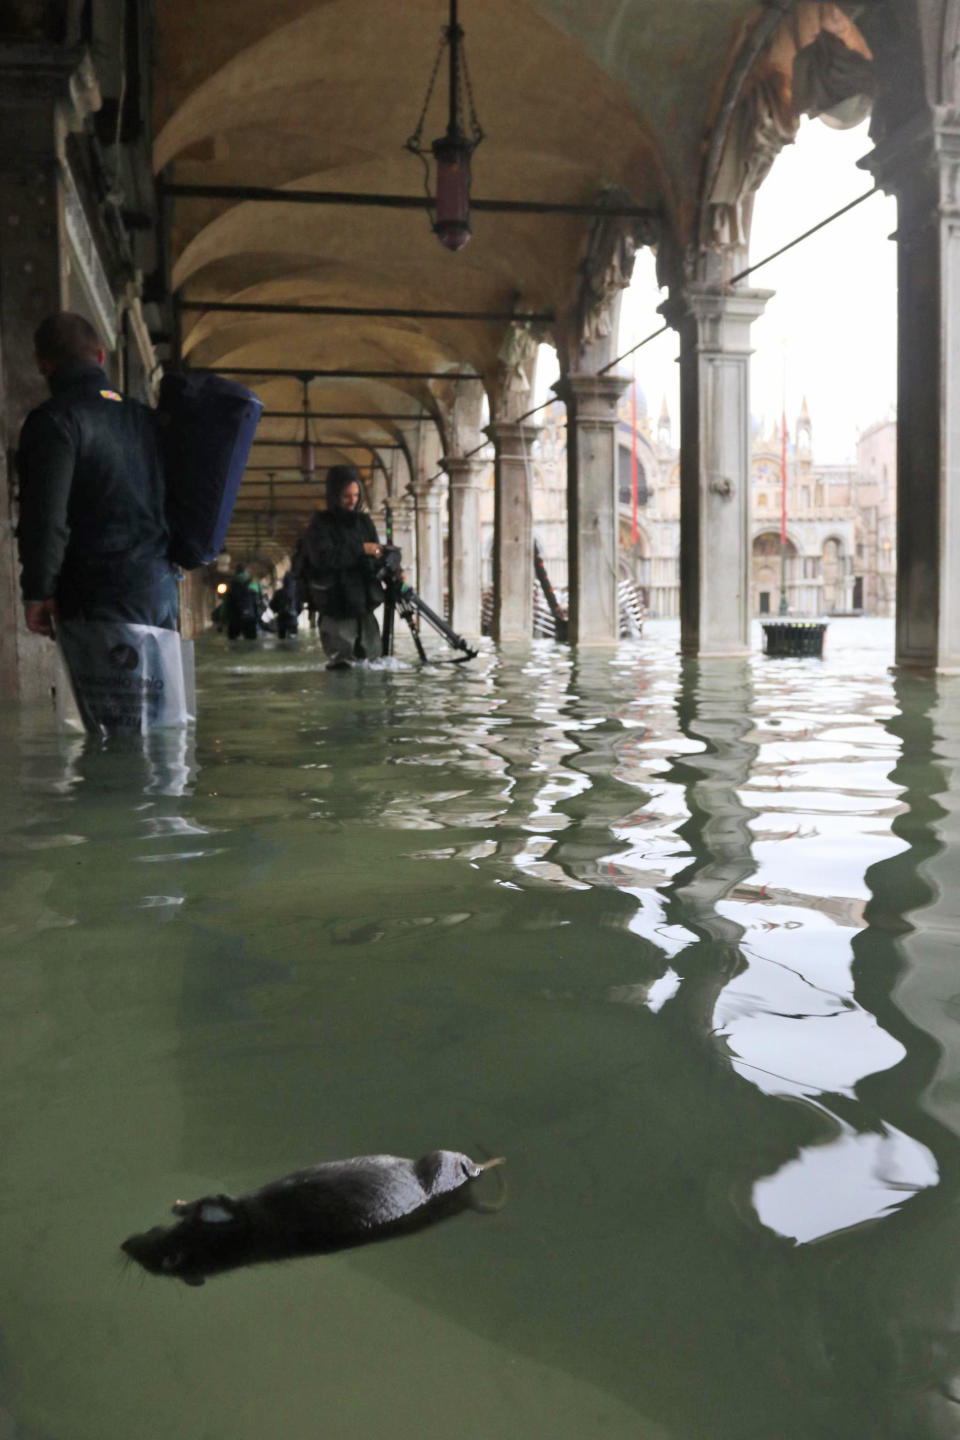 A dead rat floats in St. Mark square in Venice, Italy, Friday, Nov. 15, 2019. Exceptionally high tidal waters returned to Venice on Friday, prompting the mayor to close the iconic St. Mark's Square and call for donations to repair the Italian lagoon city just three days after it experienced its worst flooding in 50 years. (Emiliano Crespi/ANSA via AP)